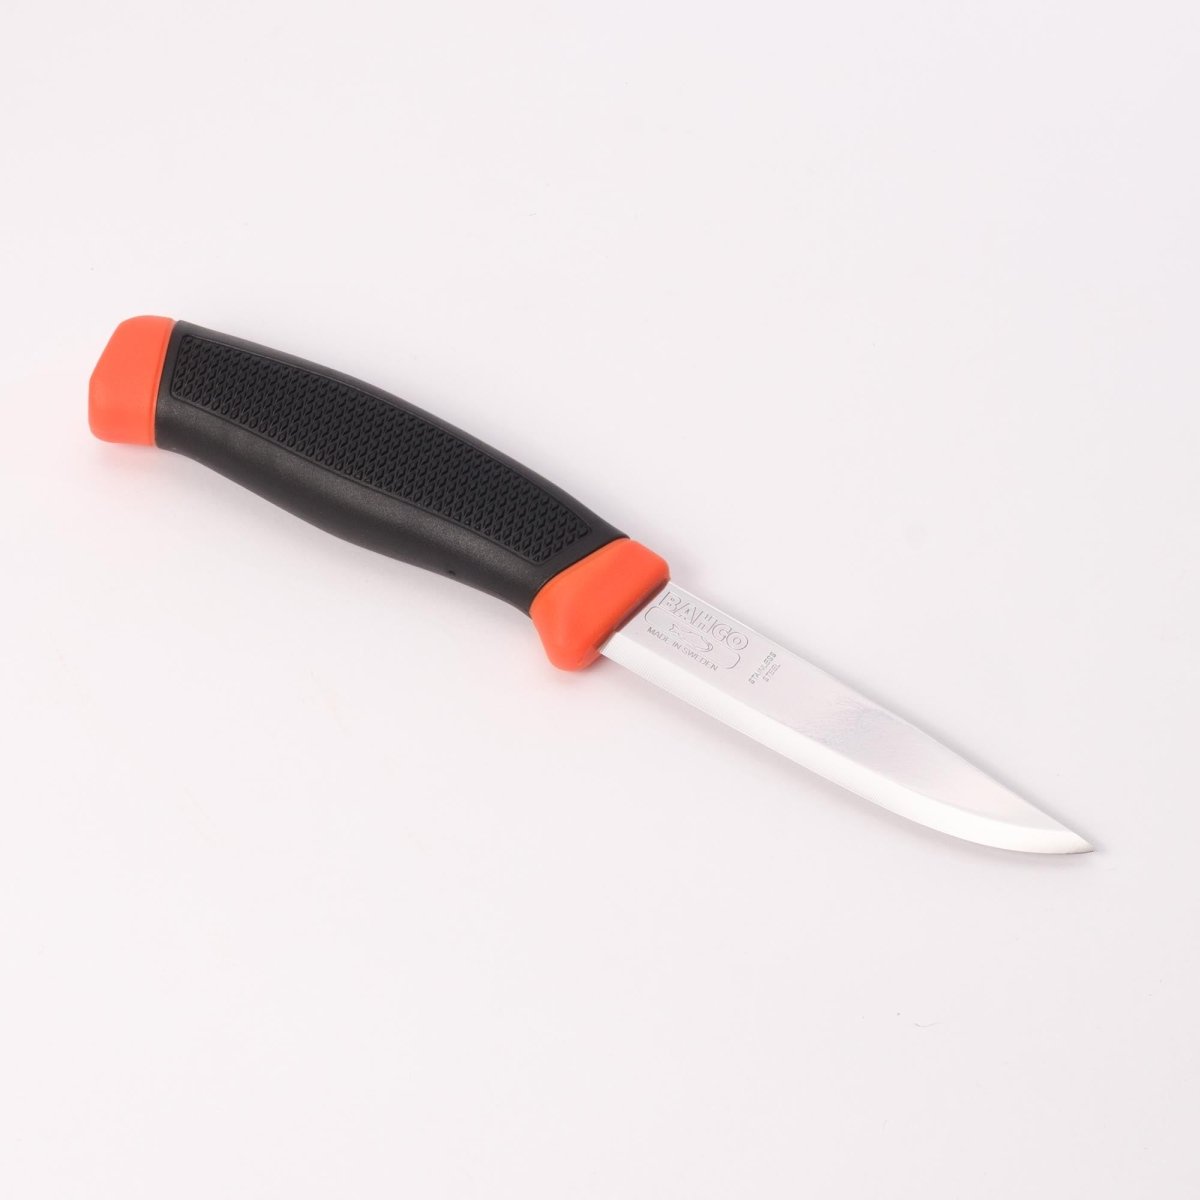 Bahco 2444 Mora Stainless Steel Knife and Sheath | Bahco | A247 Gear